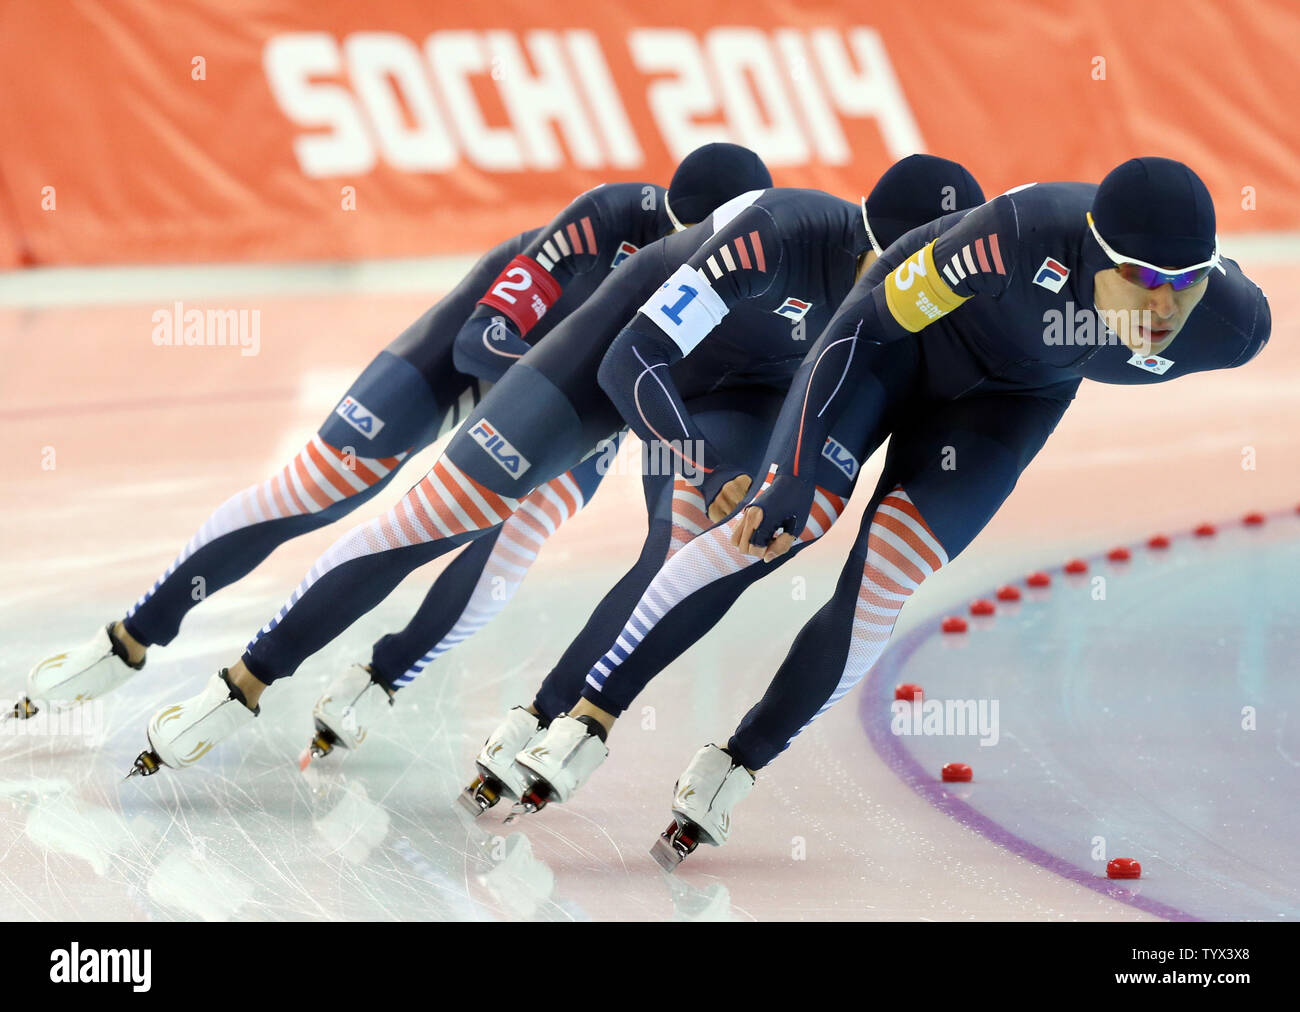 Korea's Lee Seung Hoon leads teammates, Kim Cheol Min and Joo Hyong Jun  (back) as they race to victory during the speed skating: men's team pursuit event during the Sochi Winter Olympics on February 22, 2014. The team won silver. UPI/Maya Vidon-White Stock Photo